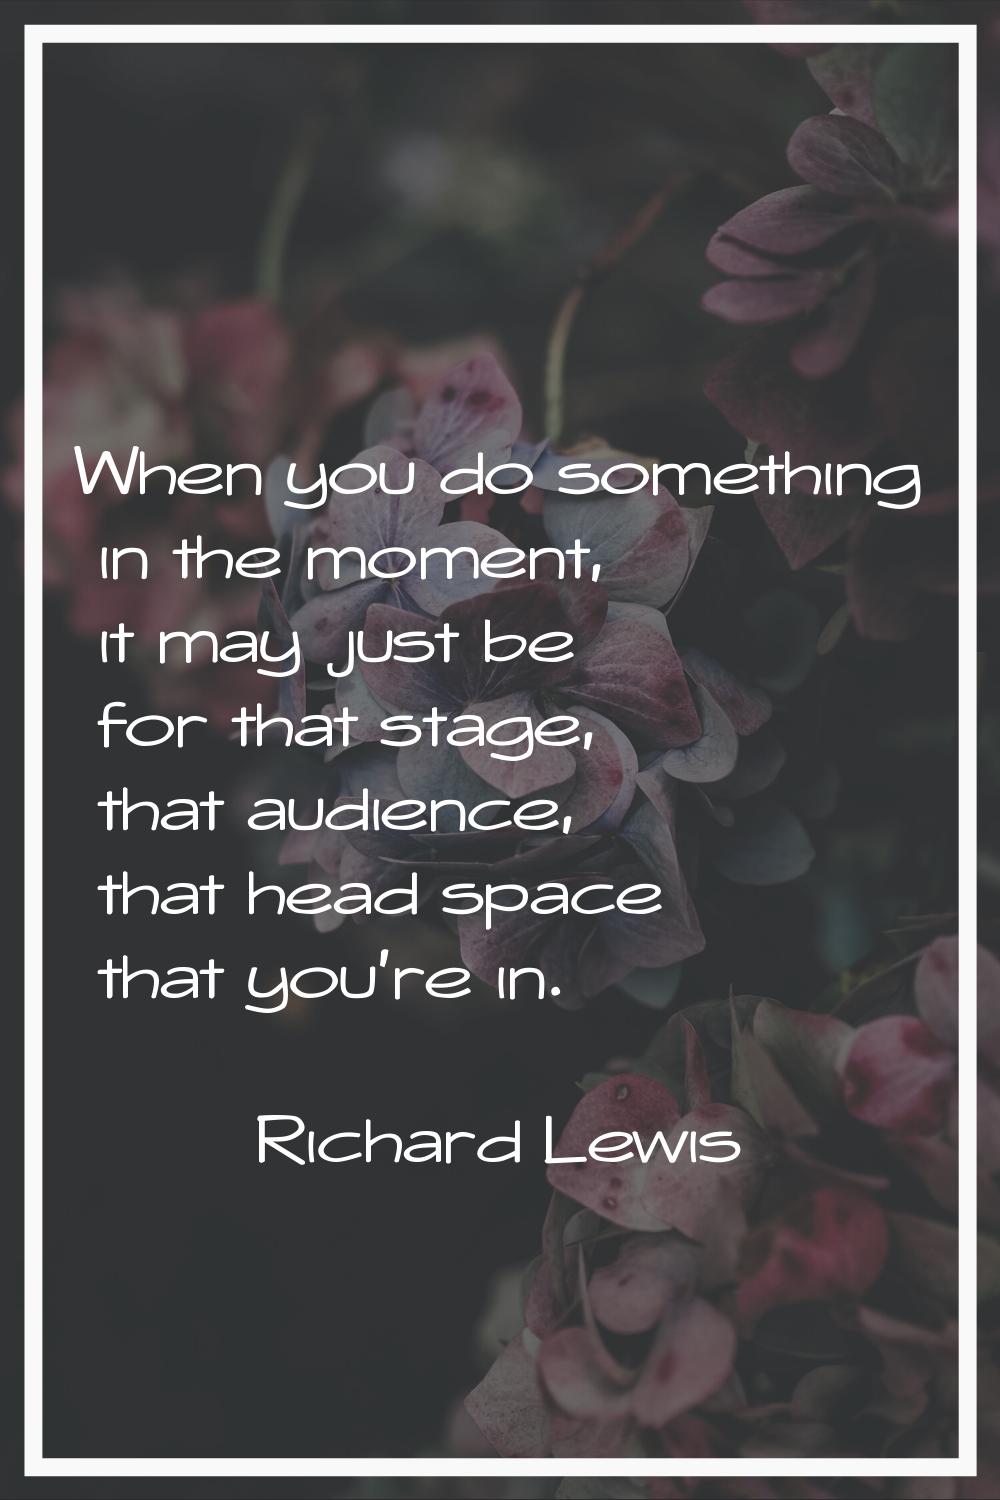 When you do something in the moment, it may just be for that stage, that audience, that head space 